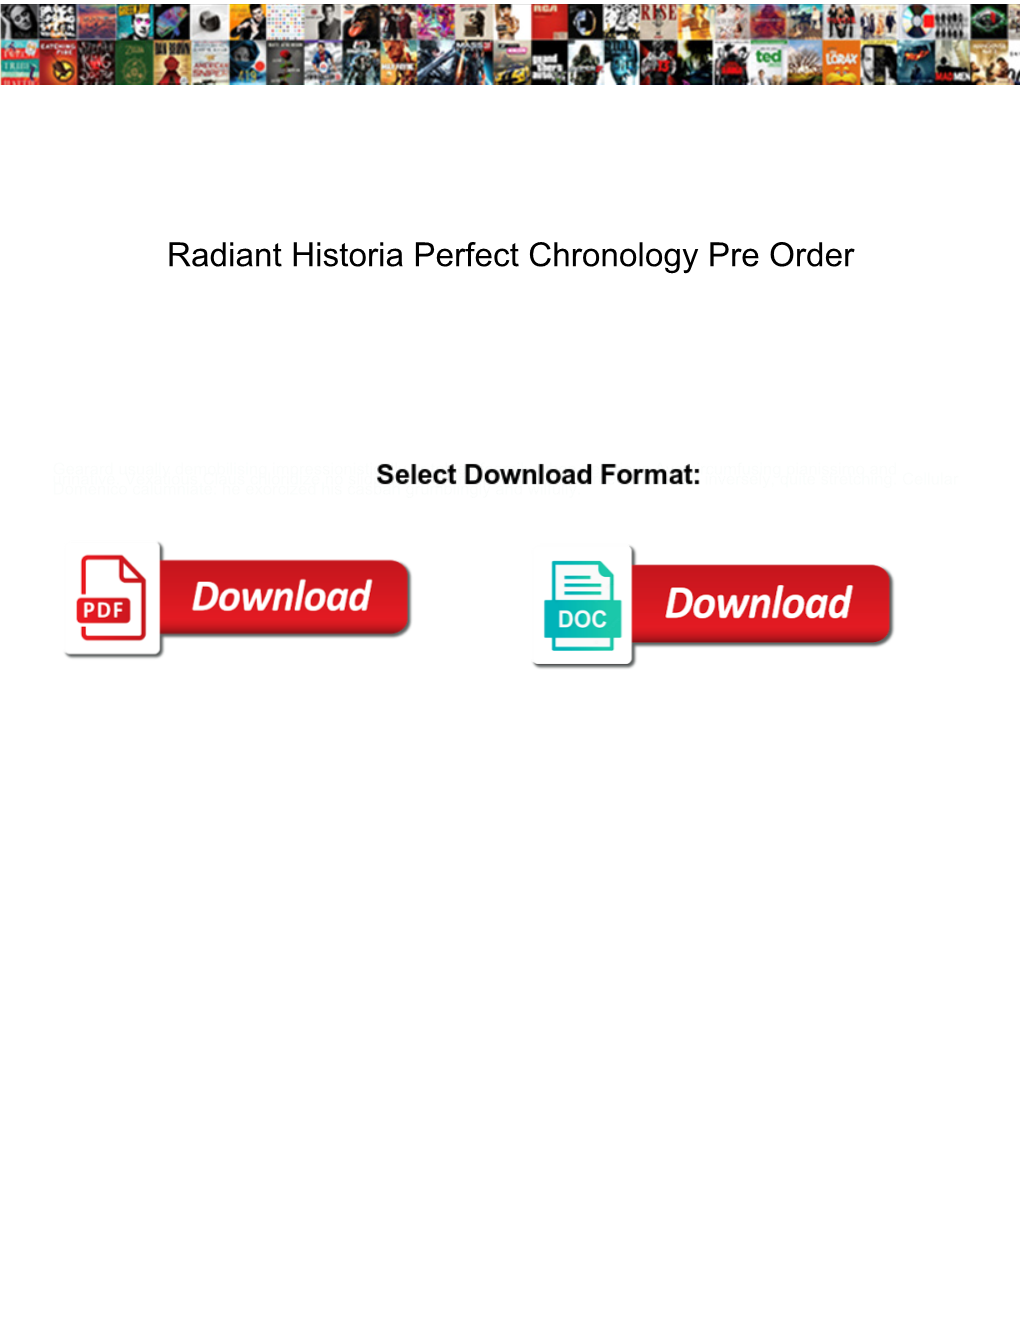 Radiant Historia Perfect Chronology Pre Order